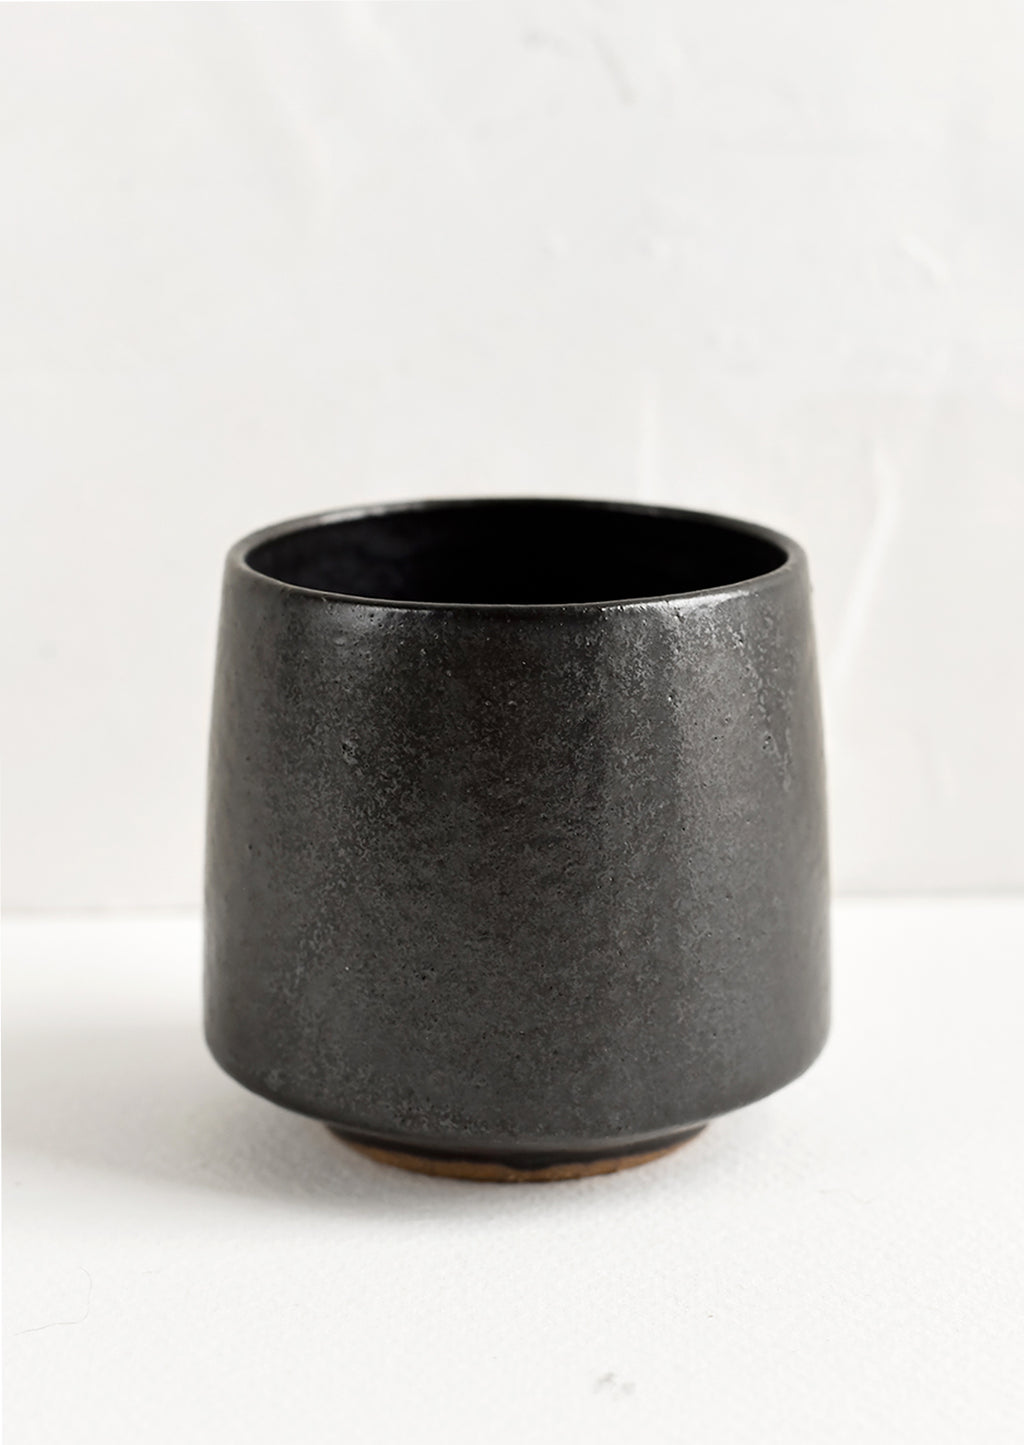 Black: A small footed ceramic cup in satin black glaze.